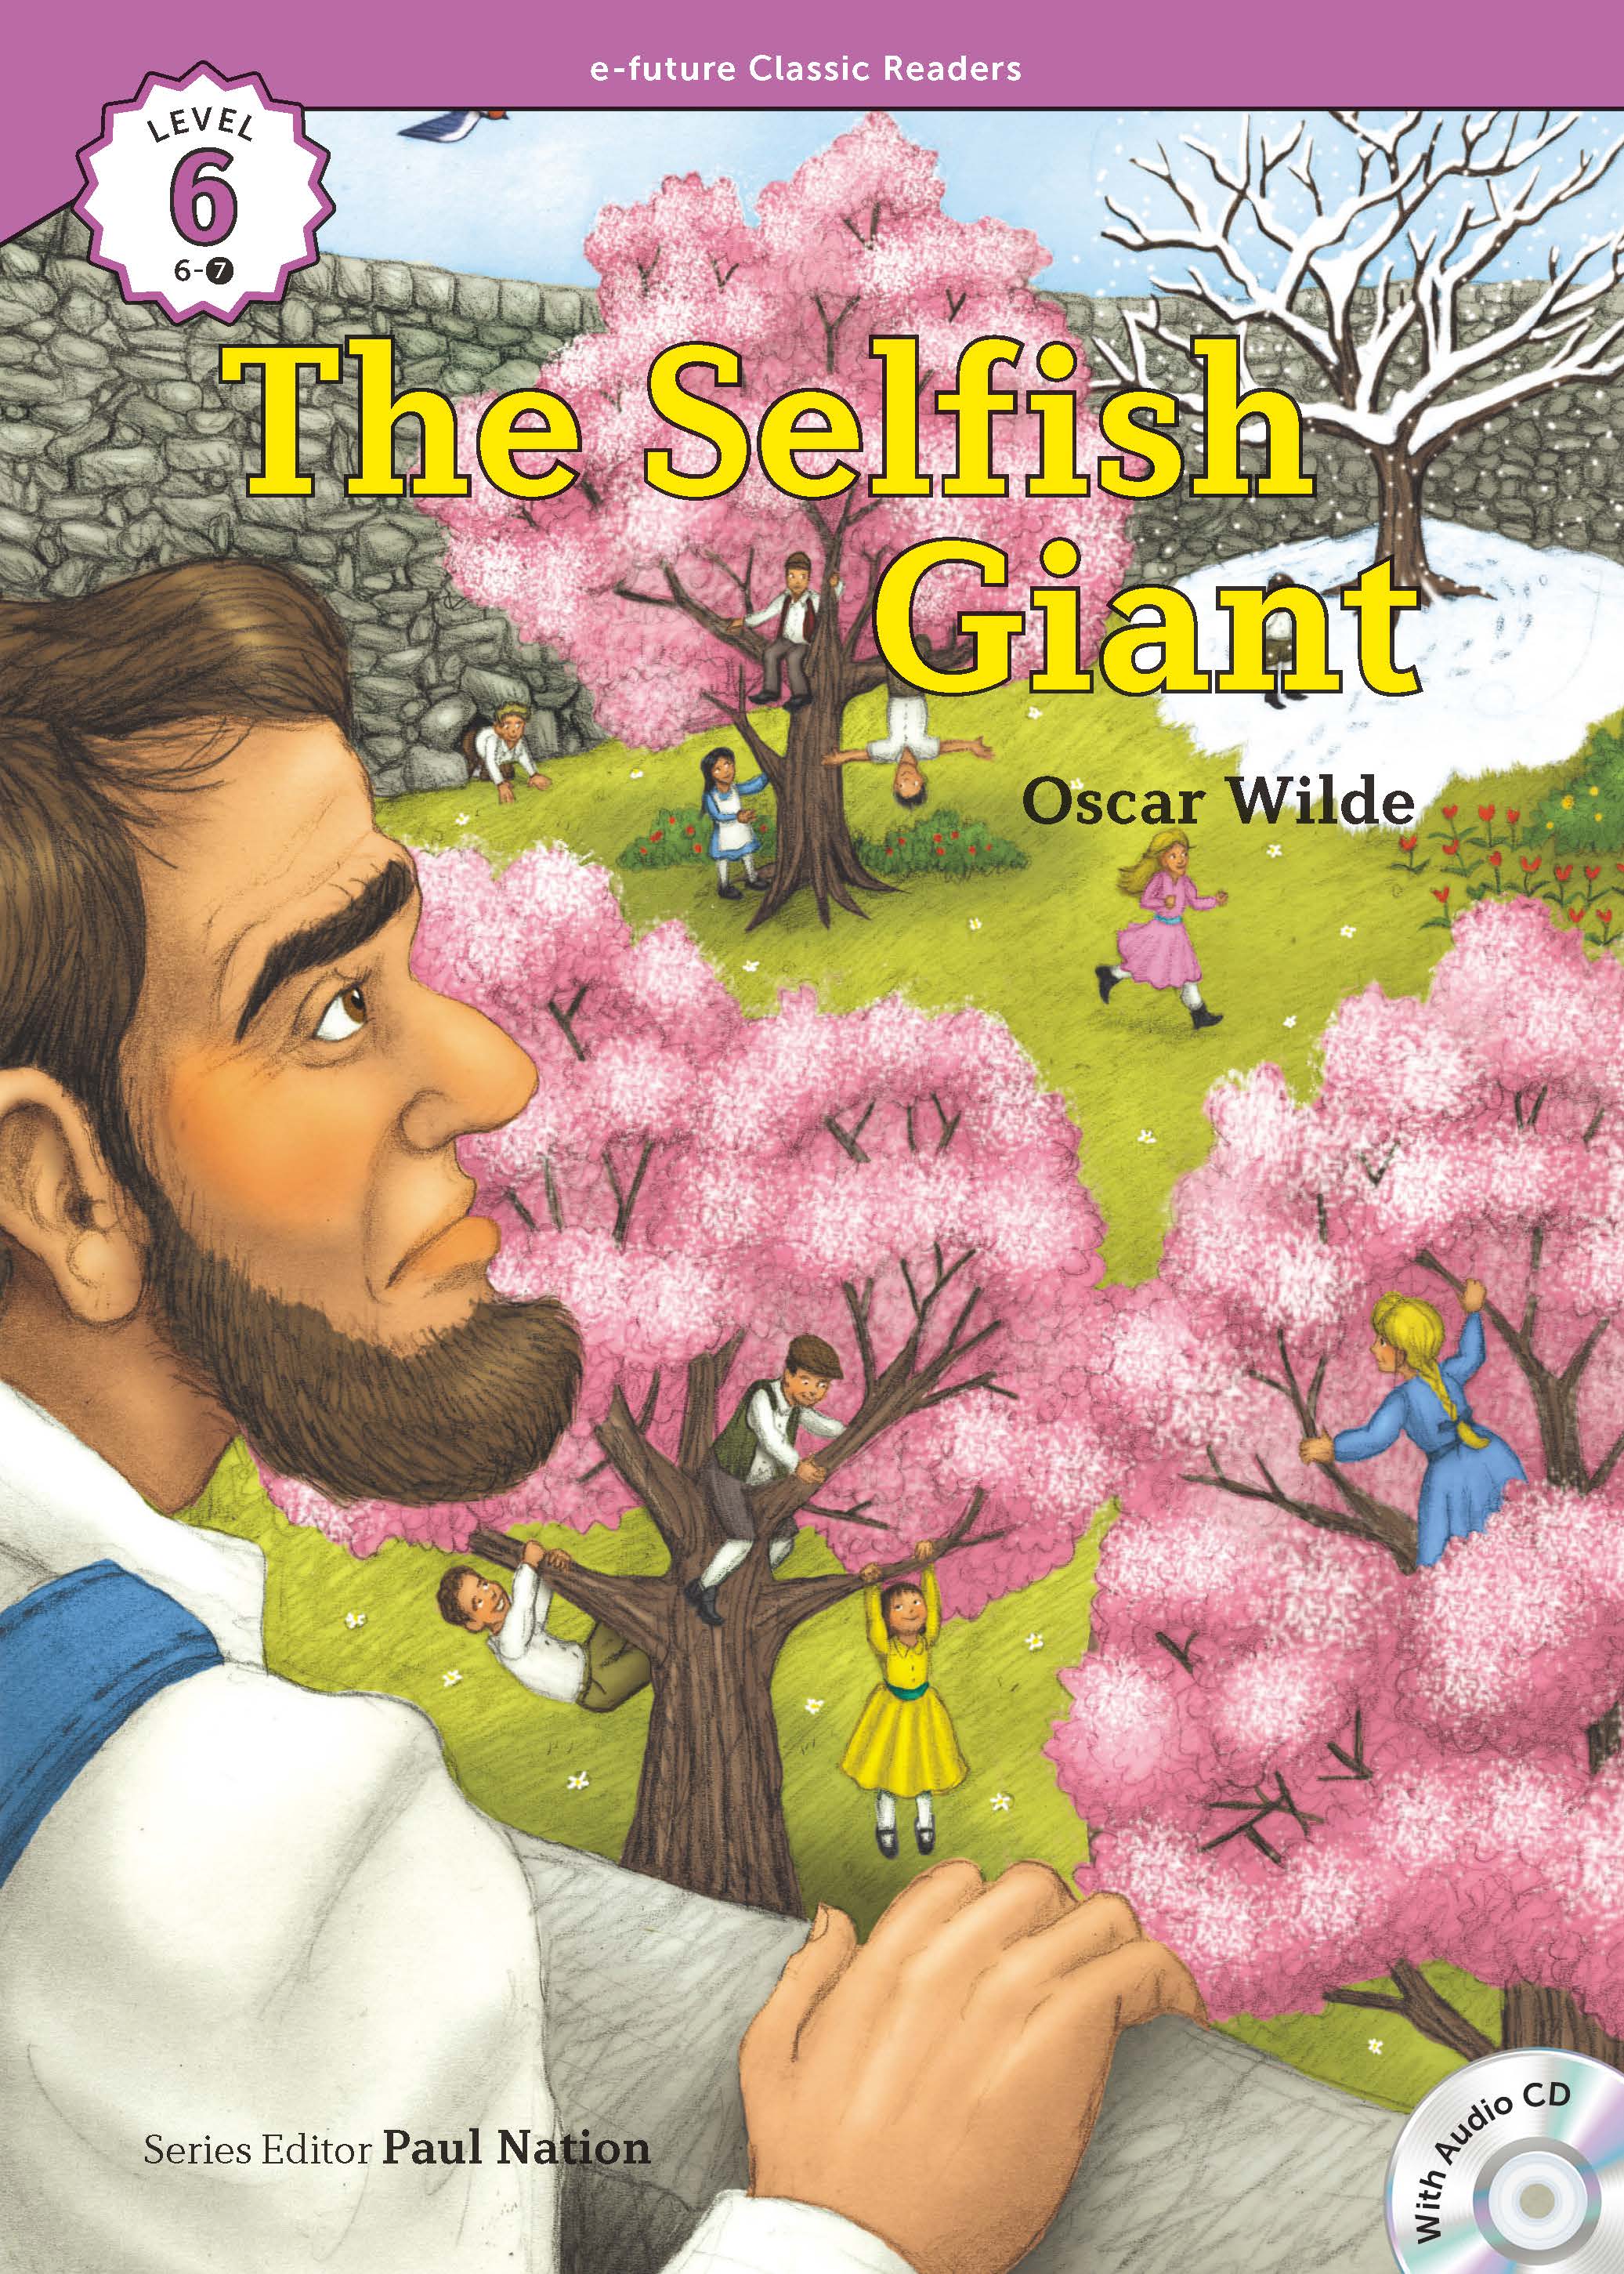 EF Classic Readers Level 6, Book 7: The Selfish Giant